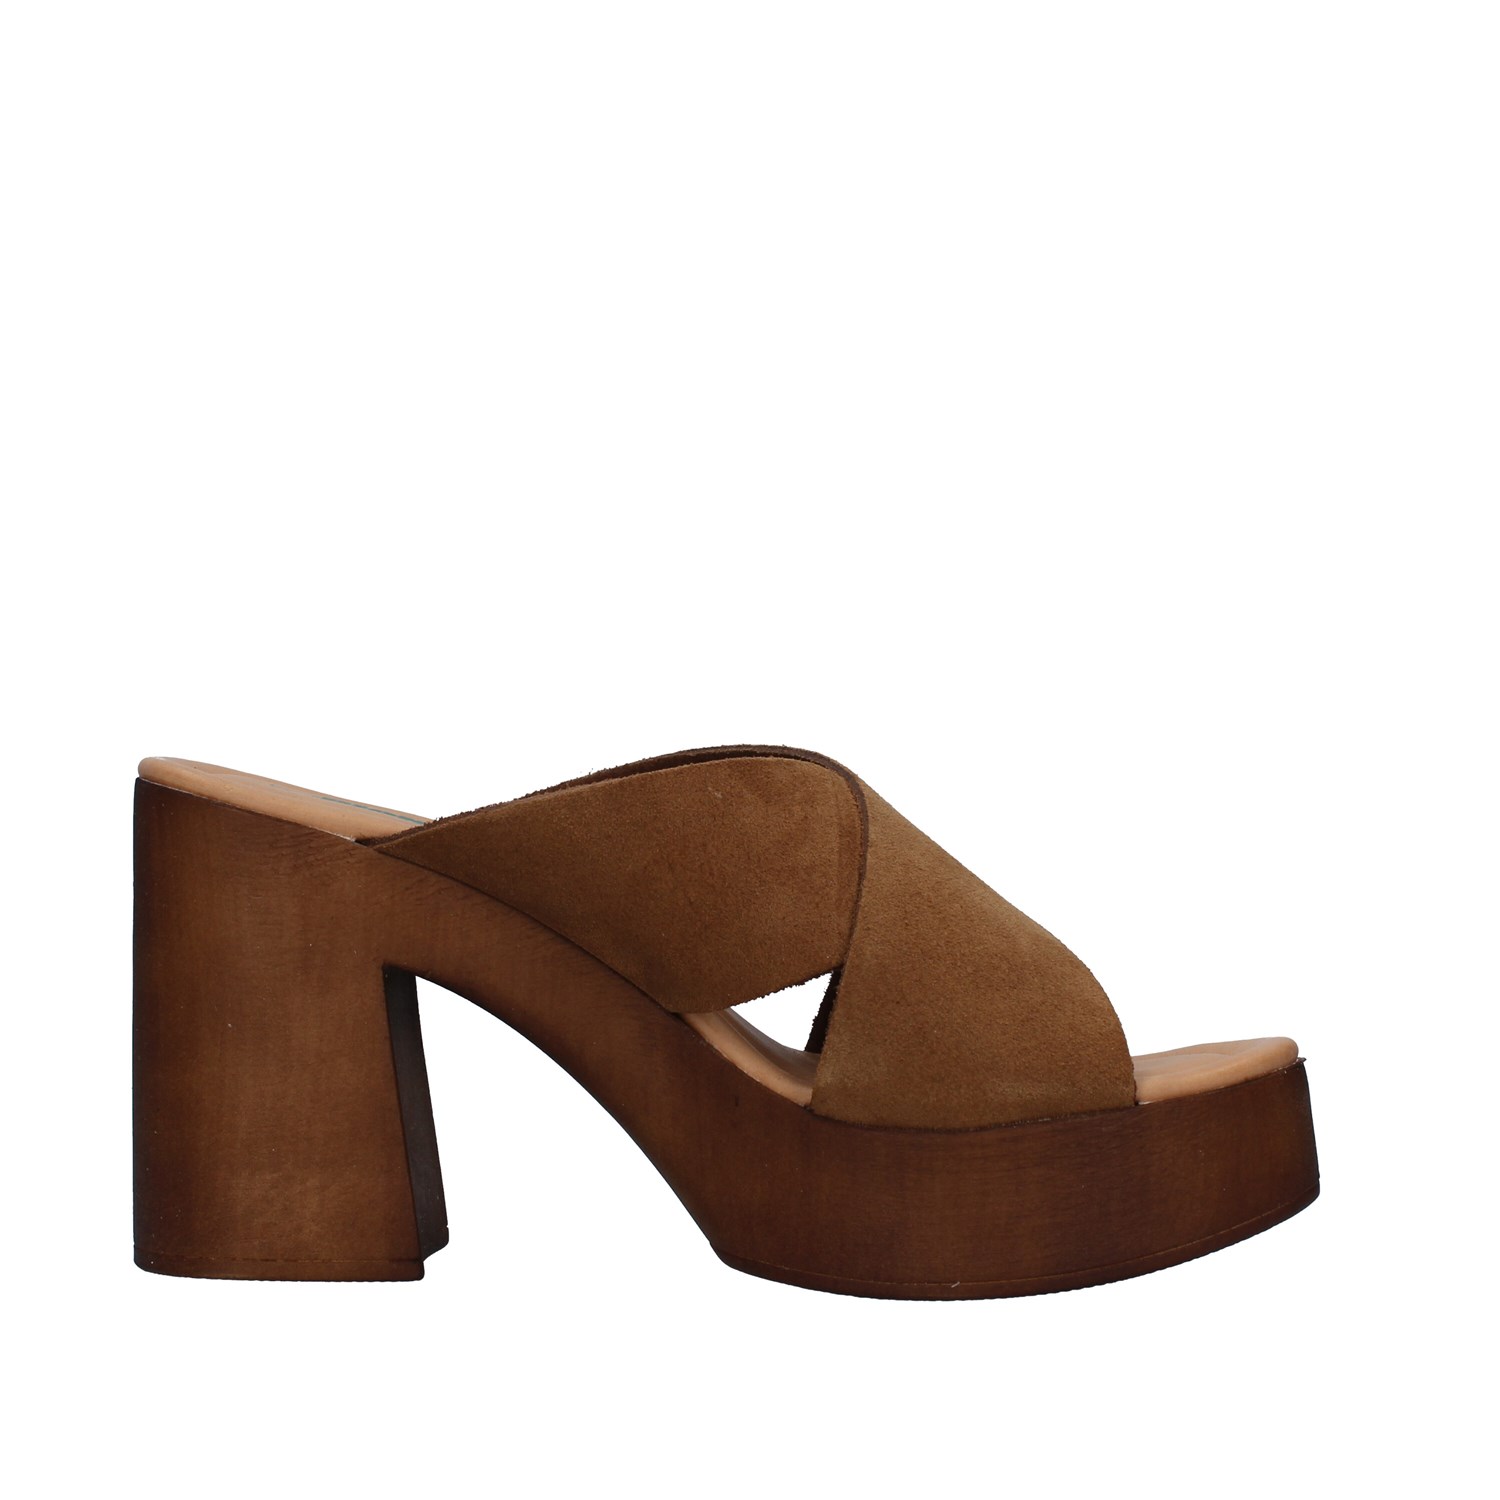 Bionatura Shoes Woman With heel BROWN 87A2133